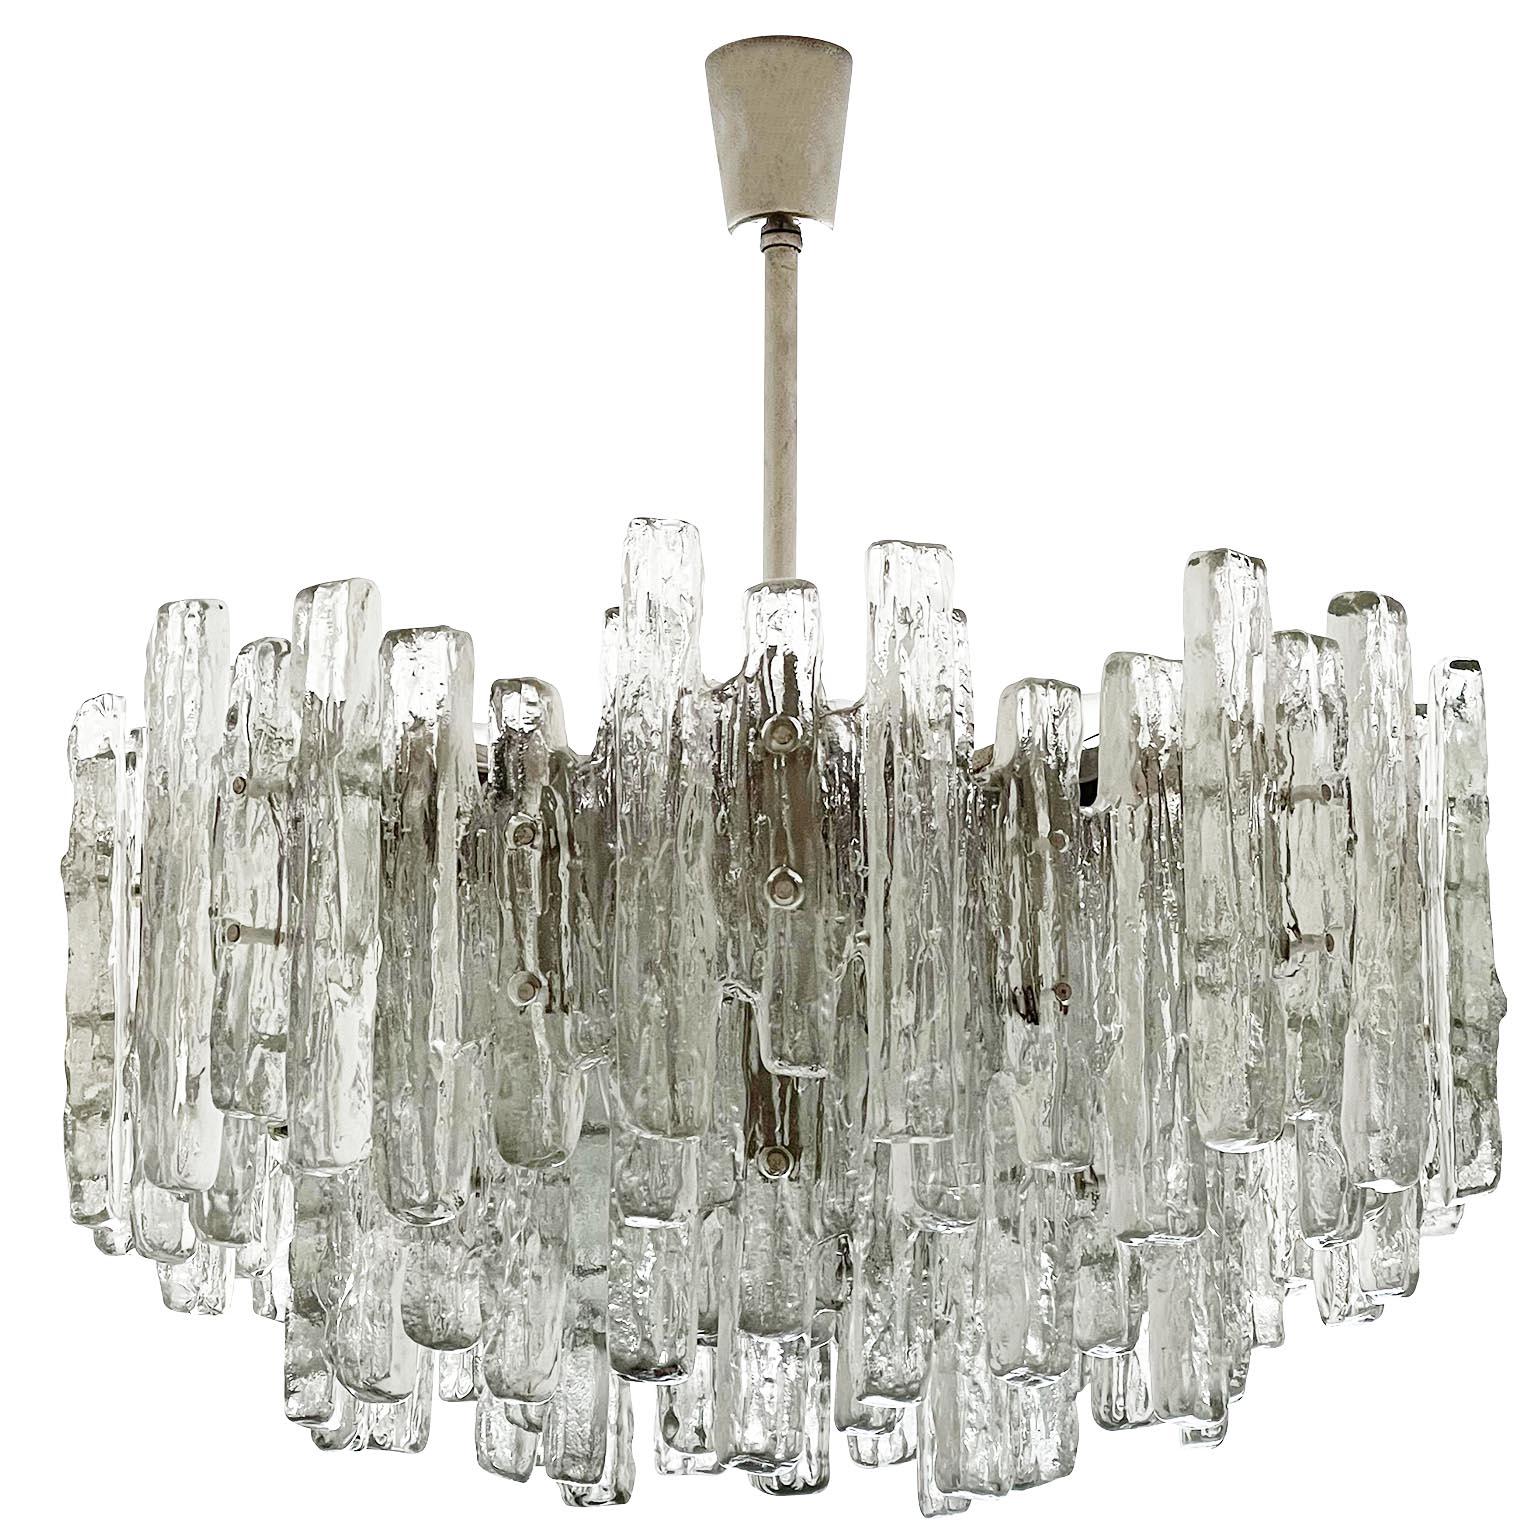 One of two extra large light fixtures model 'PUCK' no. 3864 by Kalmar, Austria, manufactured in midcentury, circa 1970 (late 1960s-early 1970s). These chandeliers are the largest version of this series. The piece has great volume and in reality it